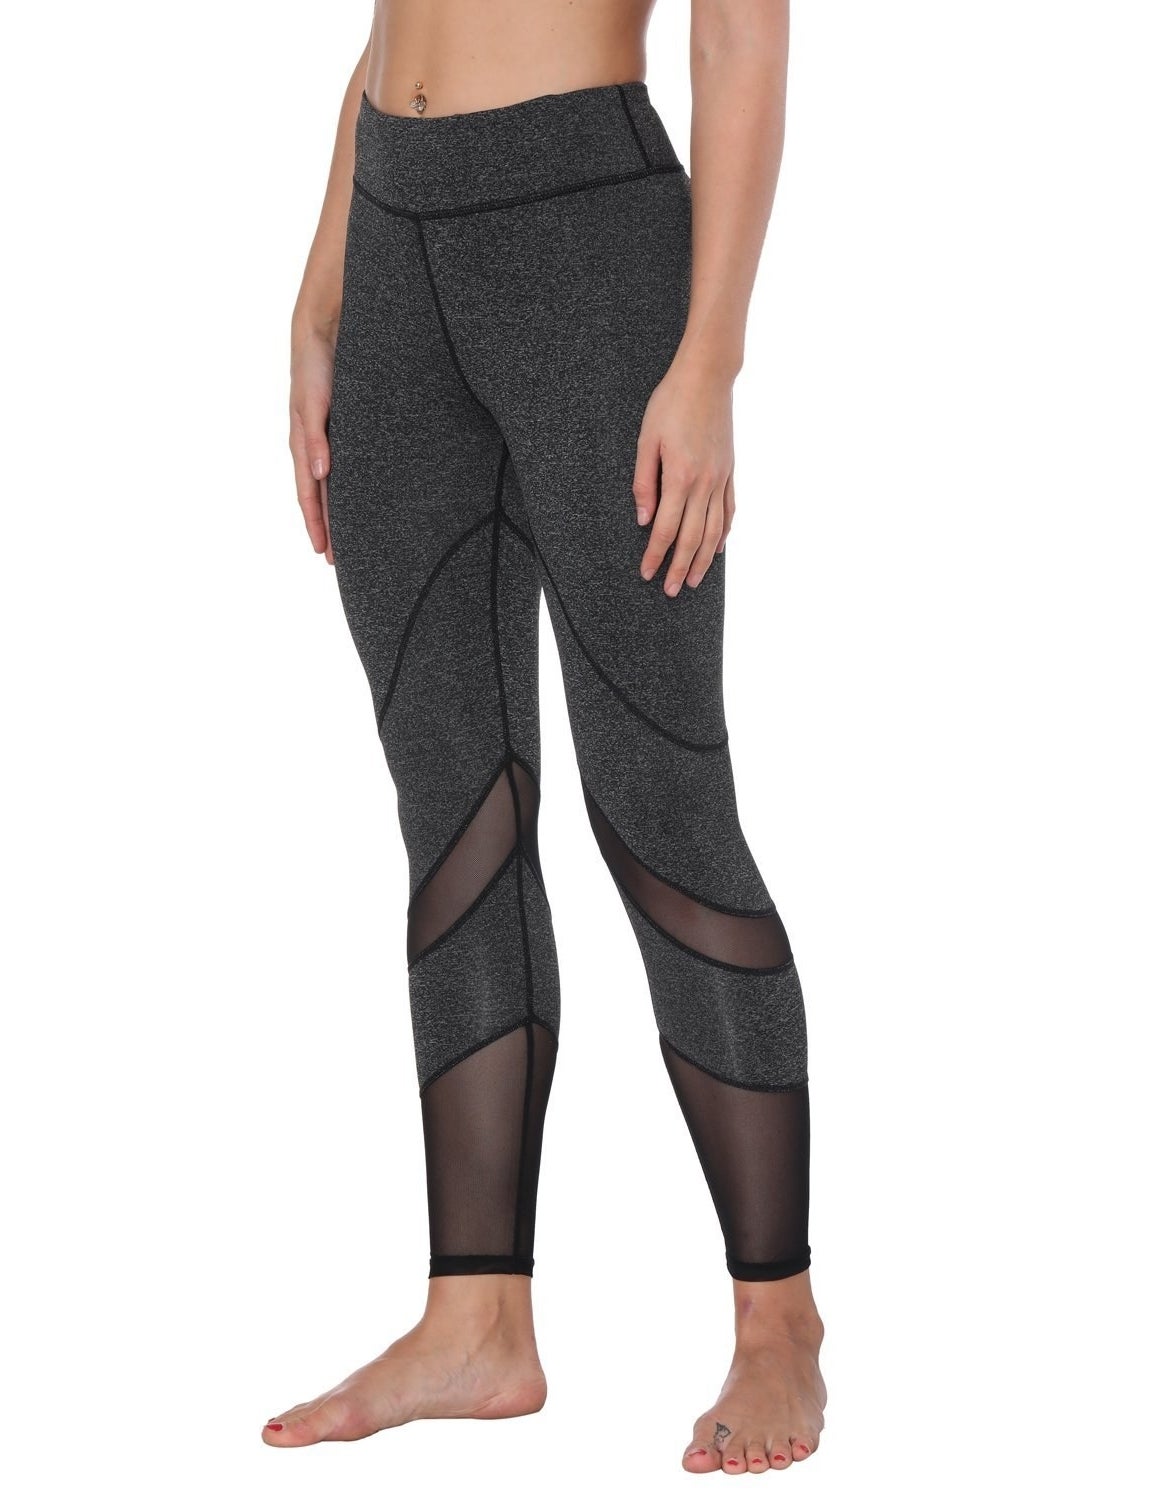 21 Of The Best Pairs Of Leggings You Can Get On Amazon